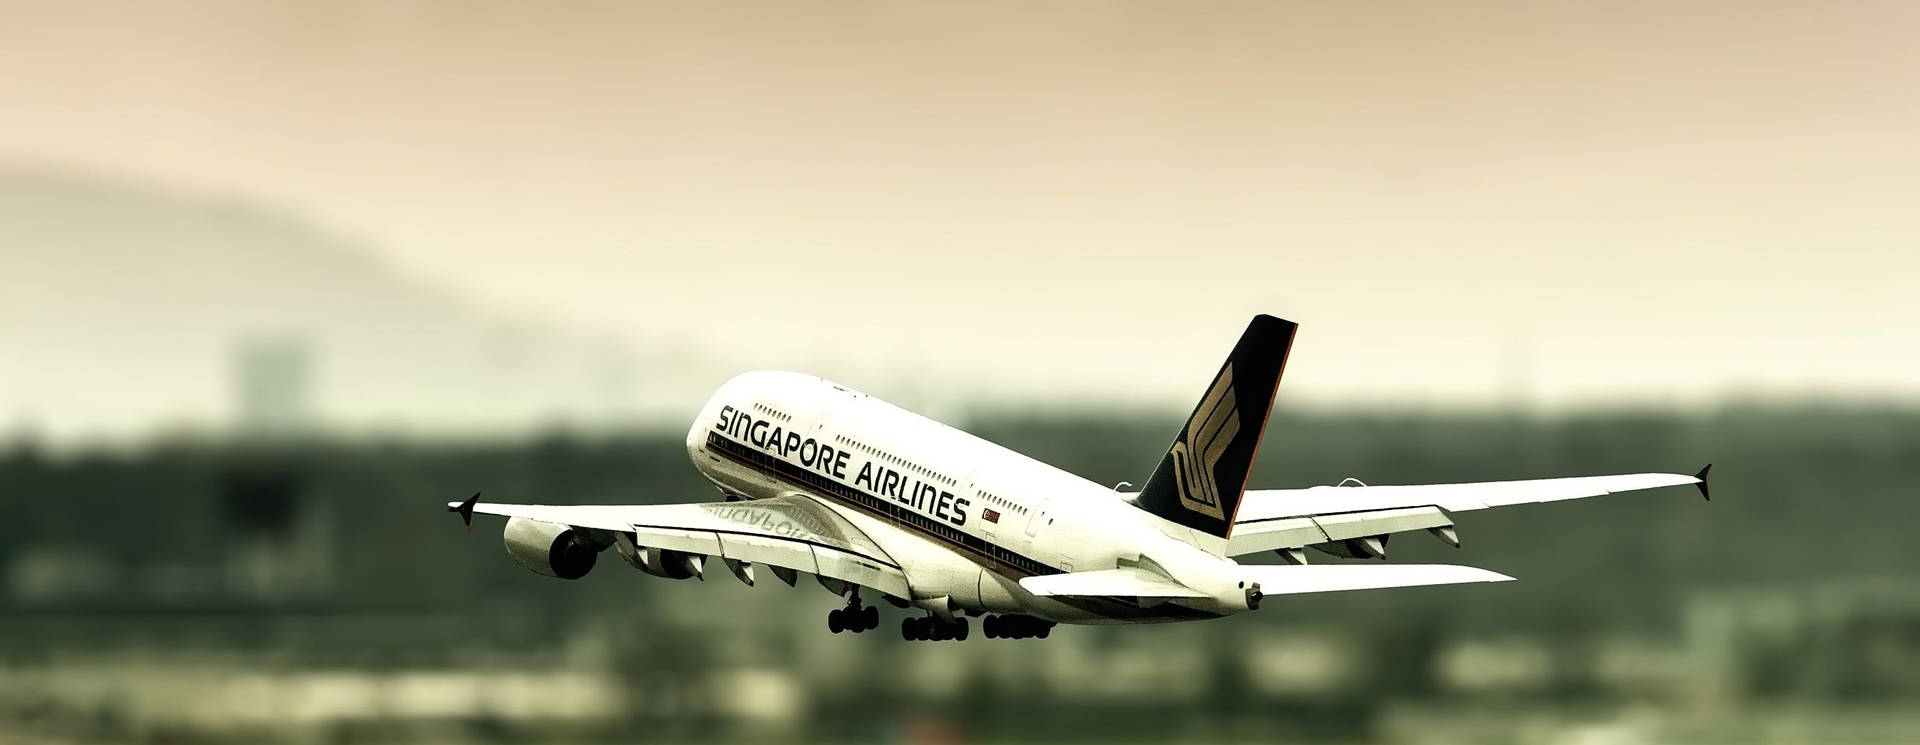 Singapore Airlines Blurry Departed Wallpaper